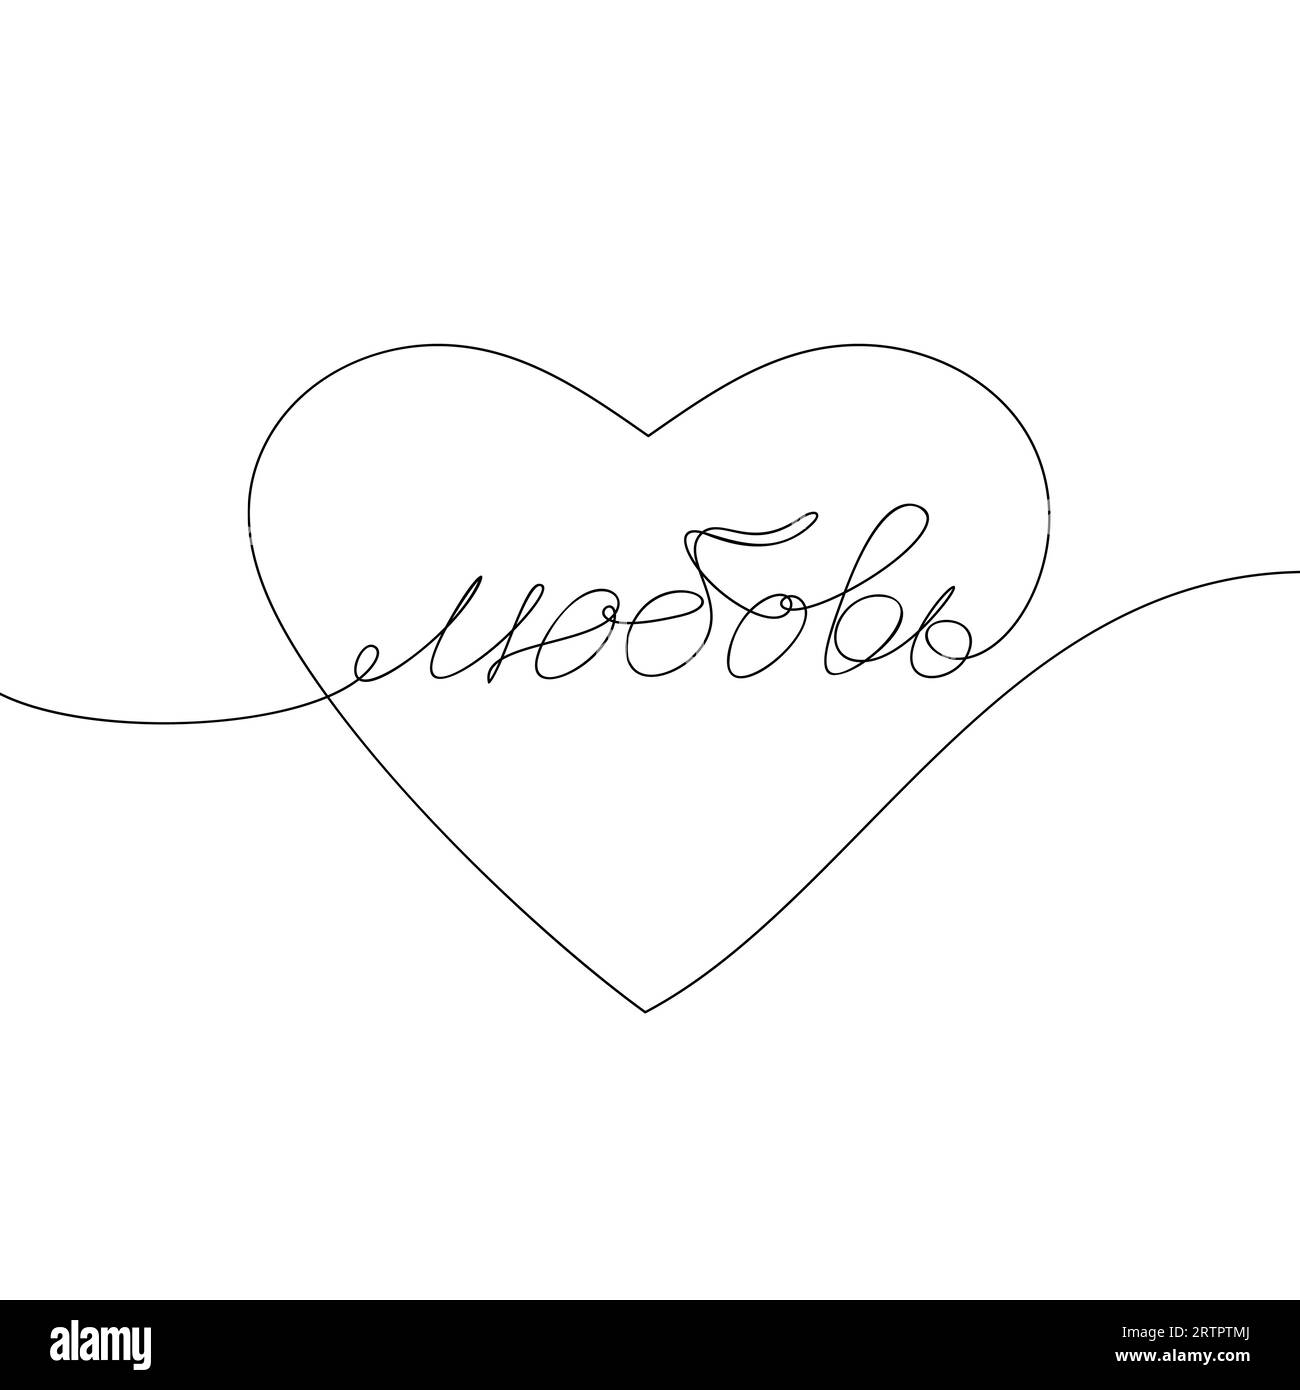 The word Love written in Russian inside a big heart in one continuous line, Black and white vector minimalist illustration of love concept one line dr Stock Vector